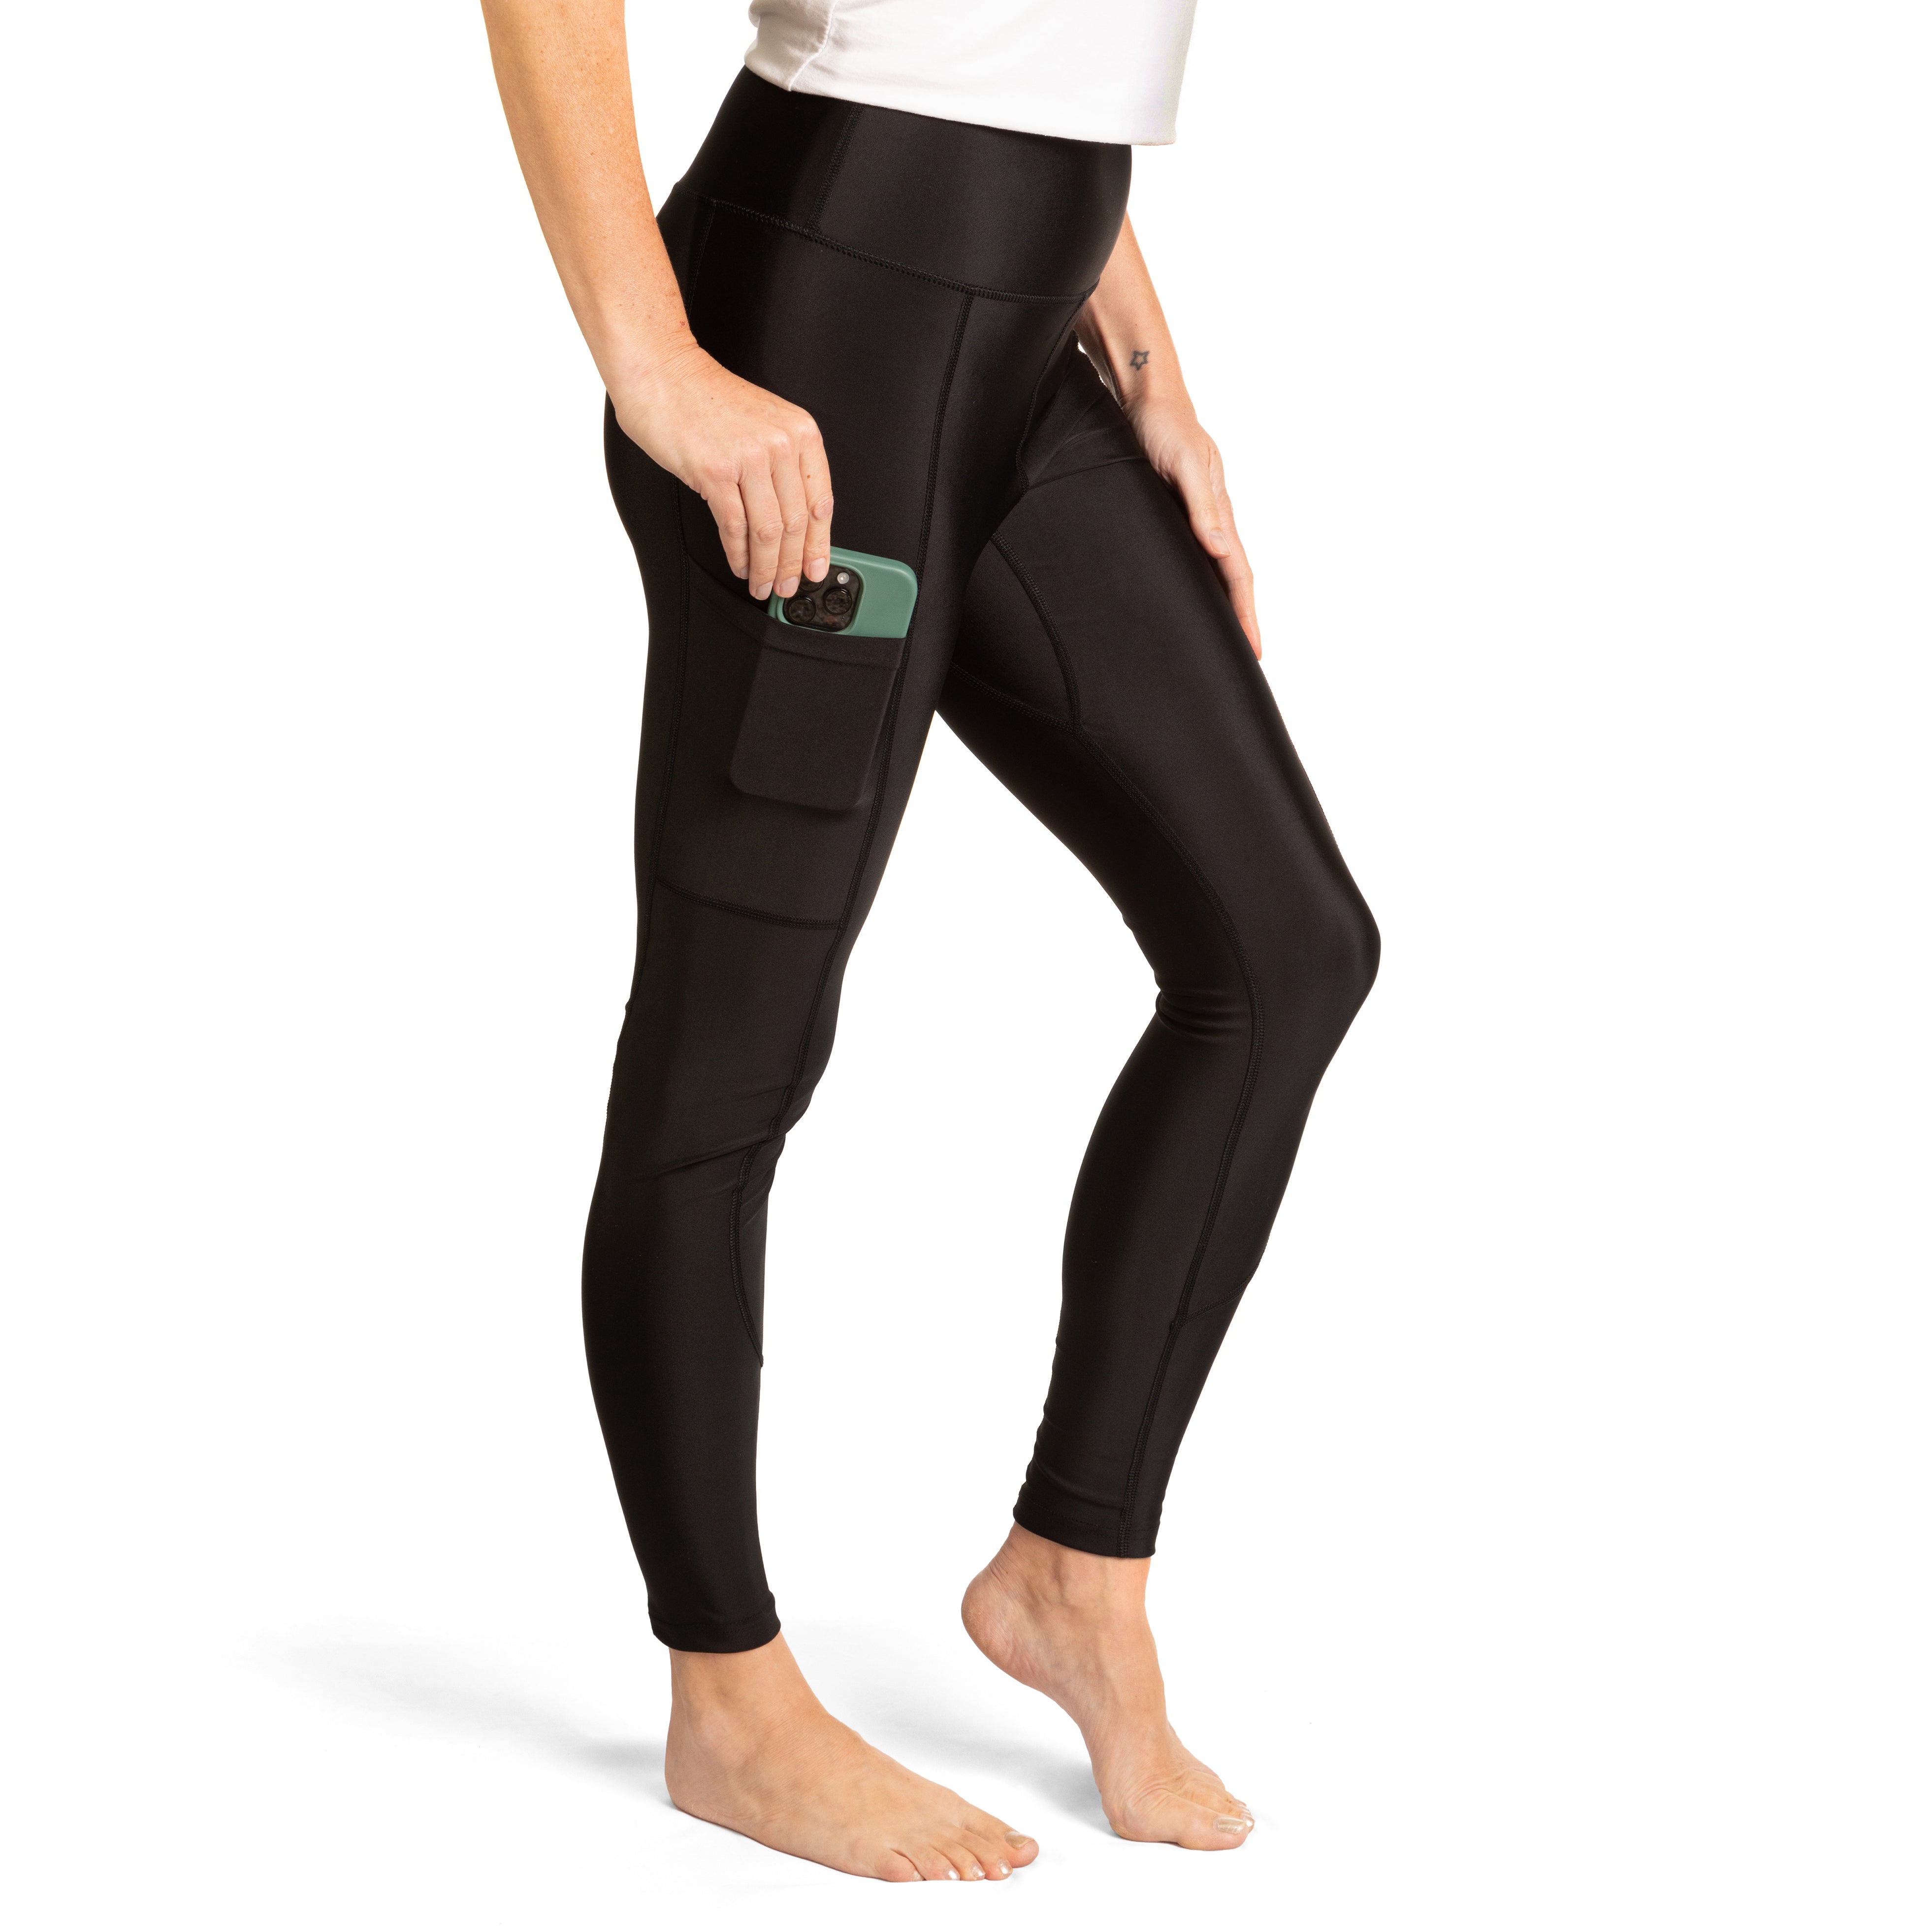 Fashion Look Featuring 90 Degree By Reflex Activewear Pants and 90